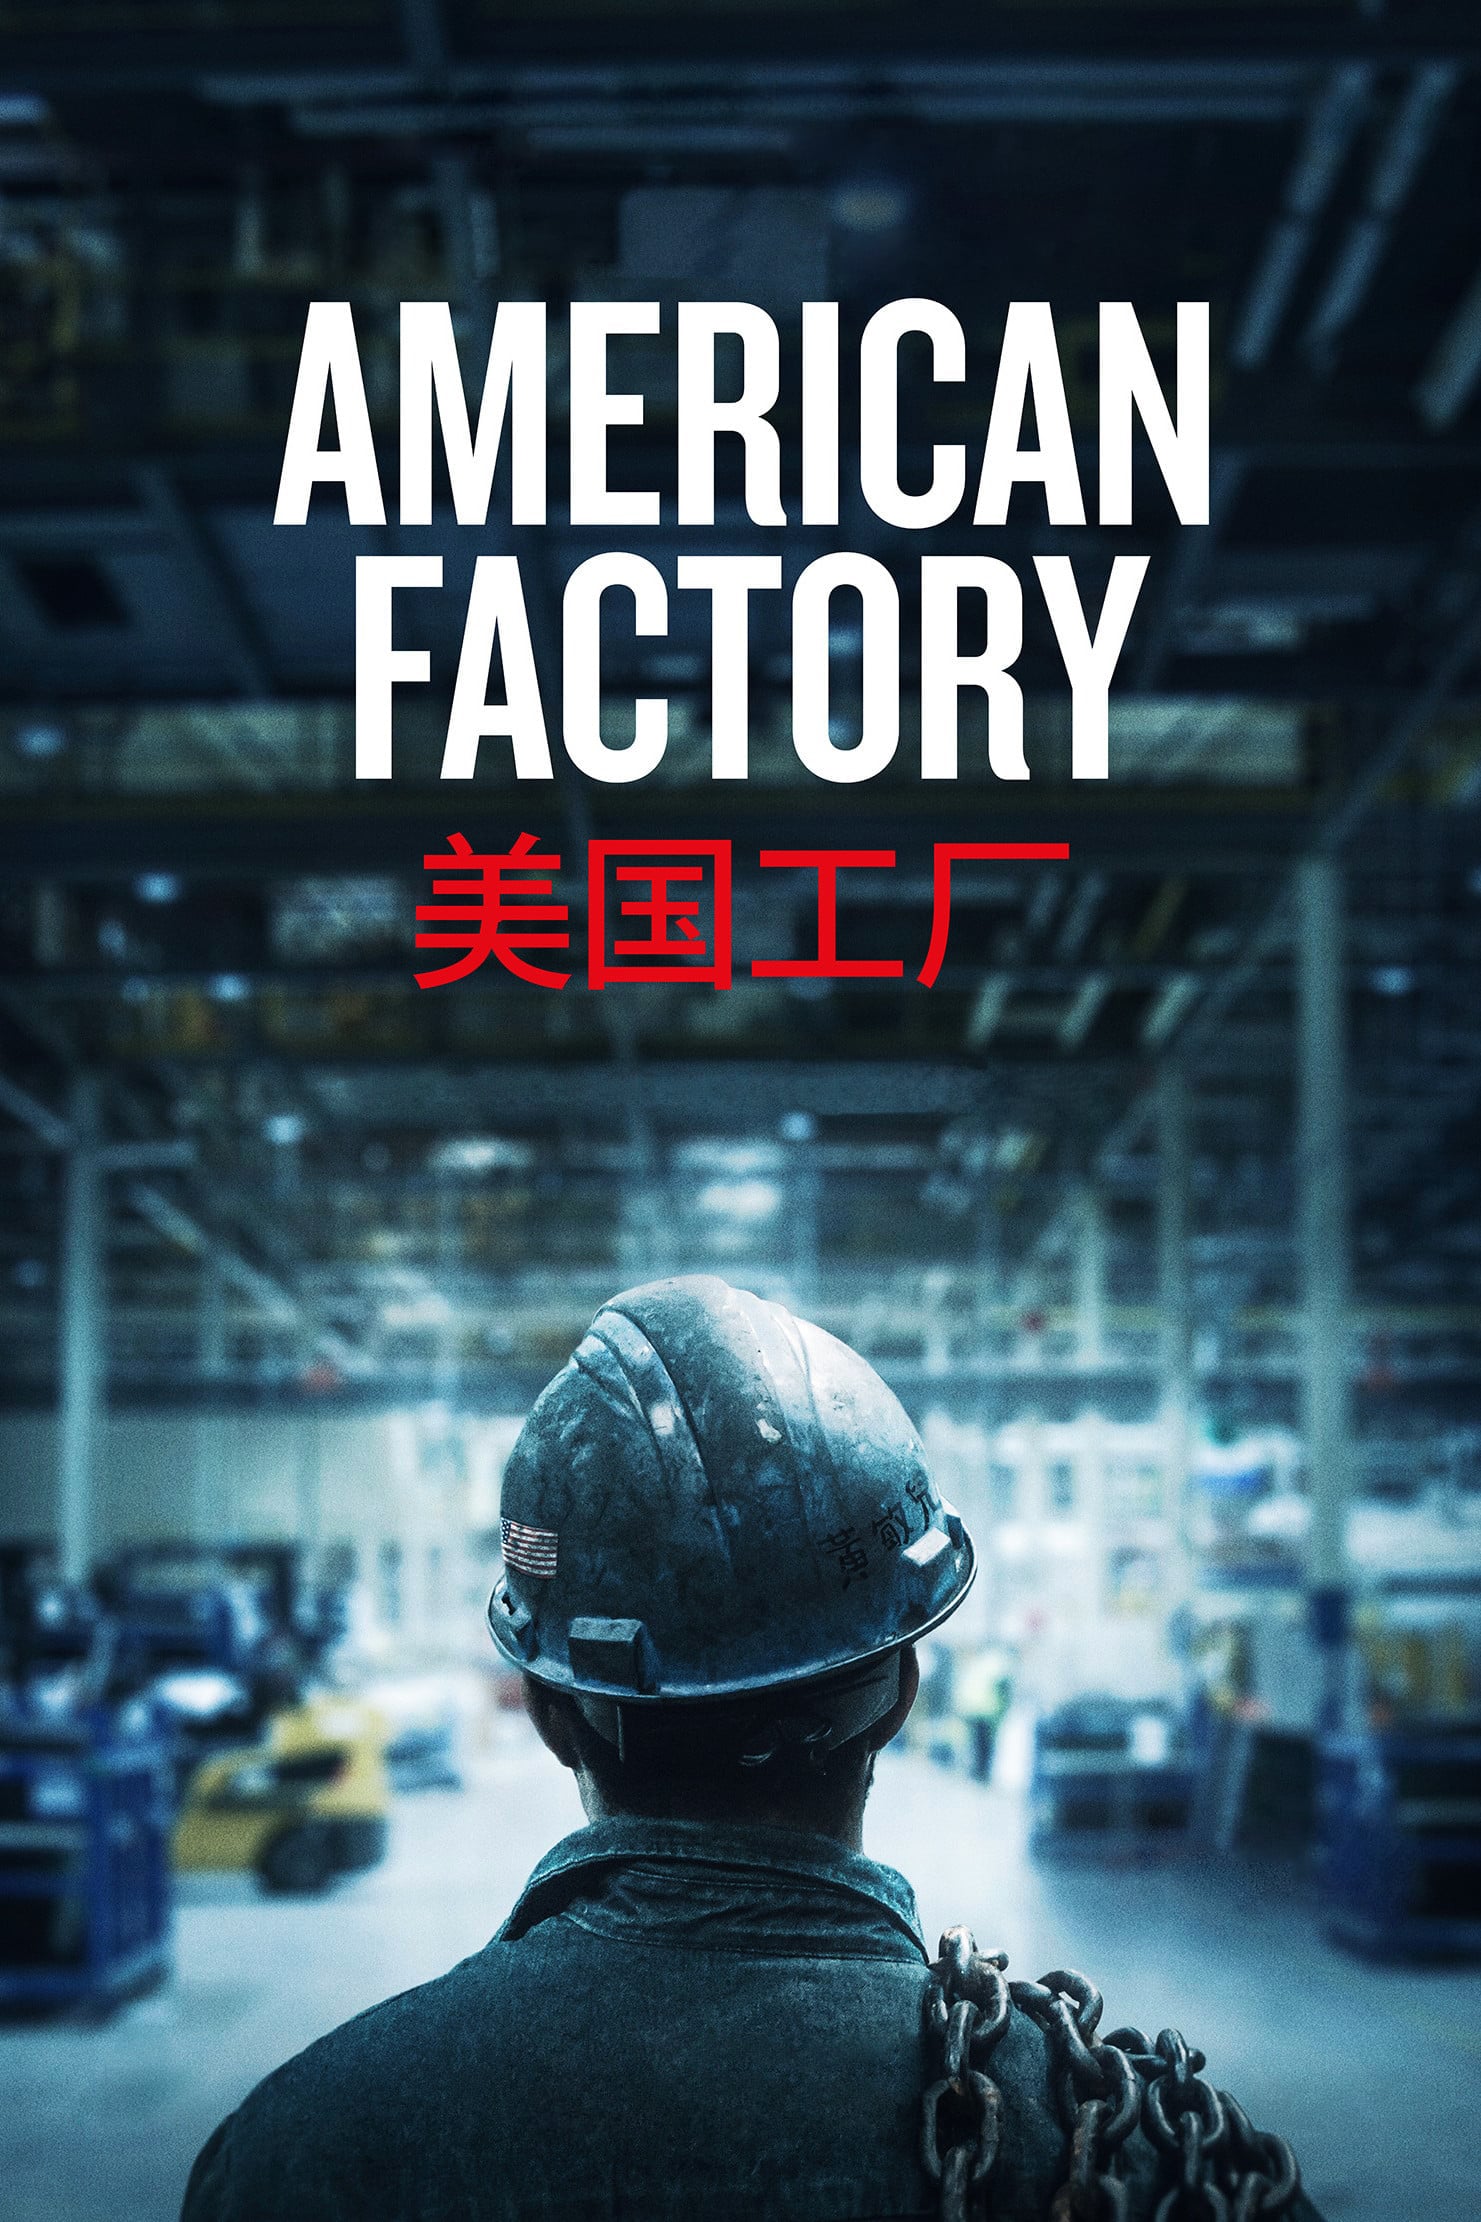 2019 American Factory movie poster